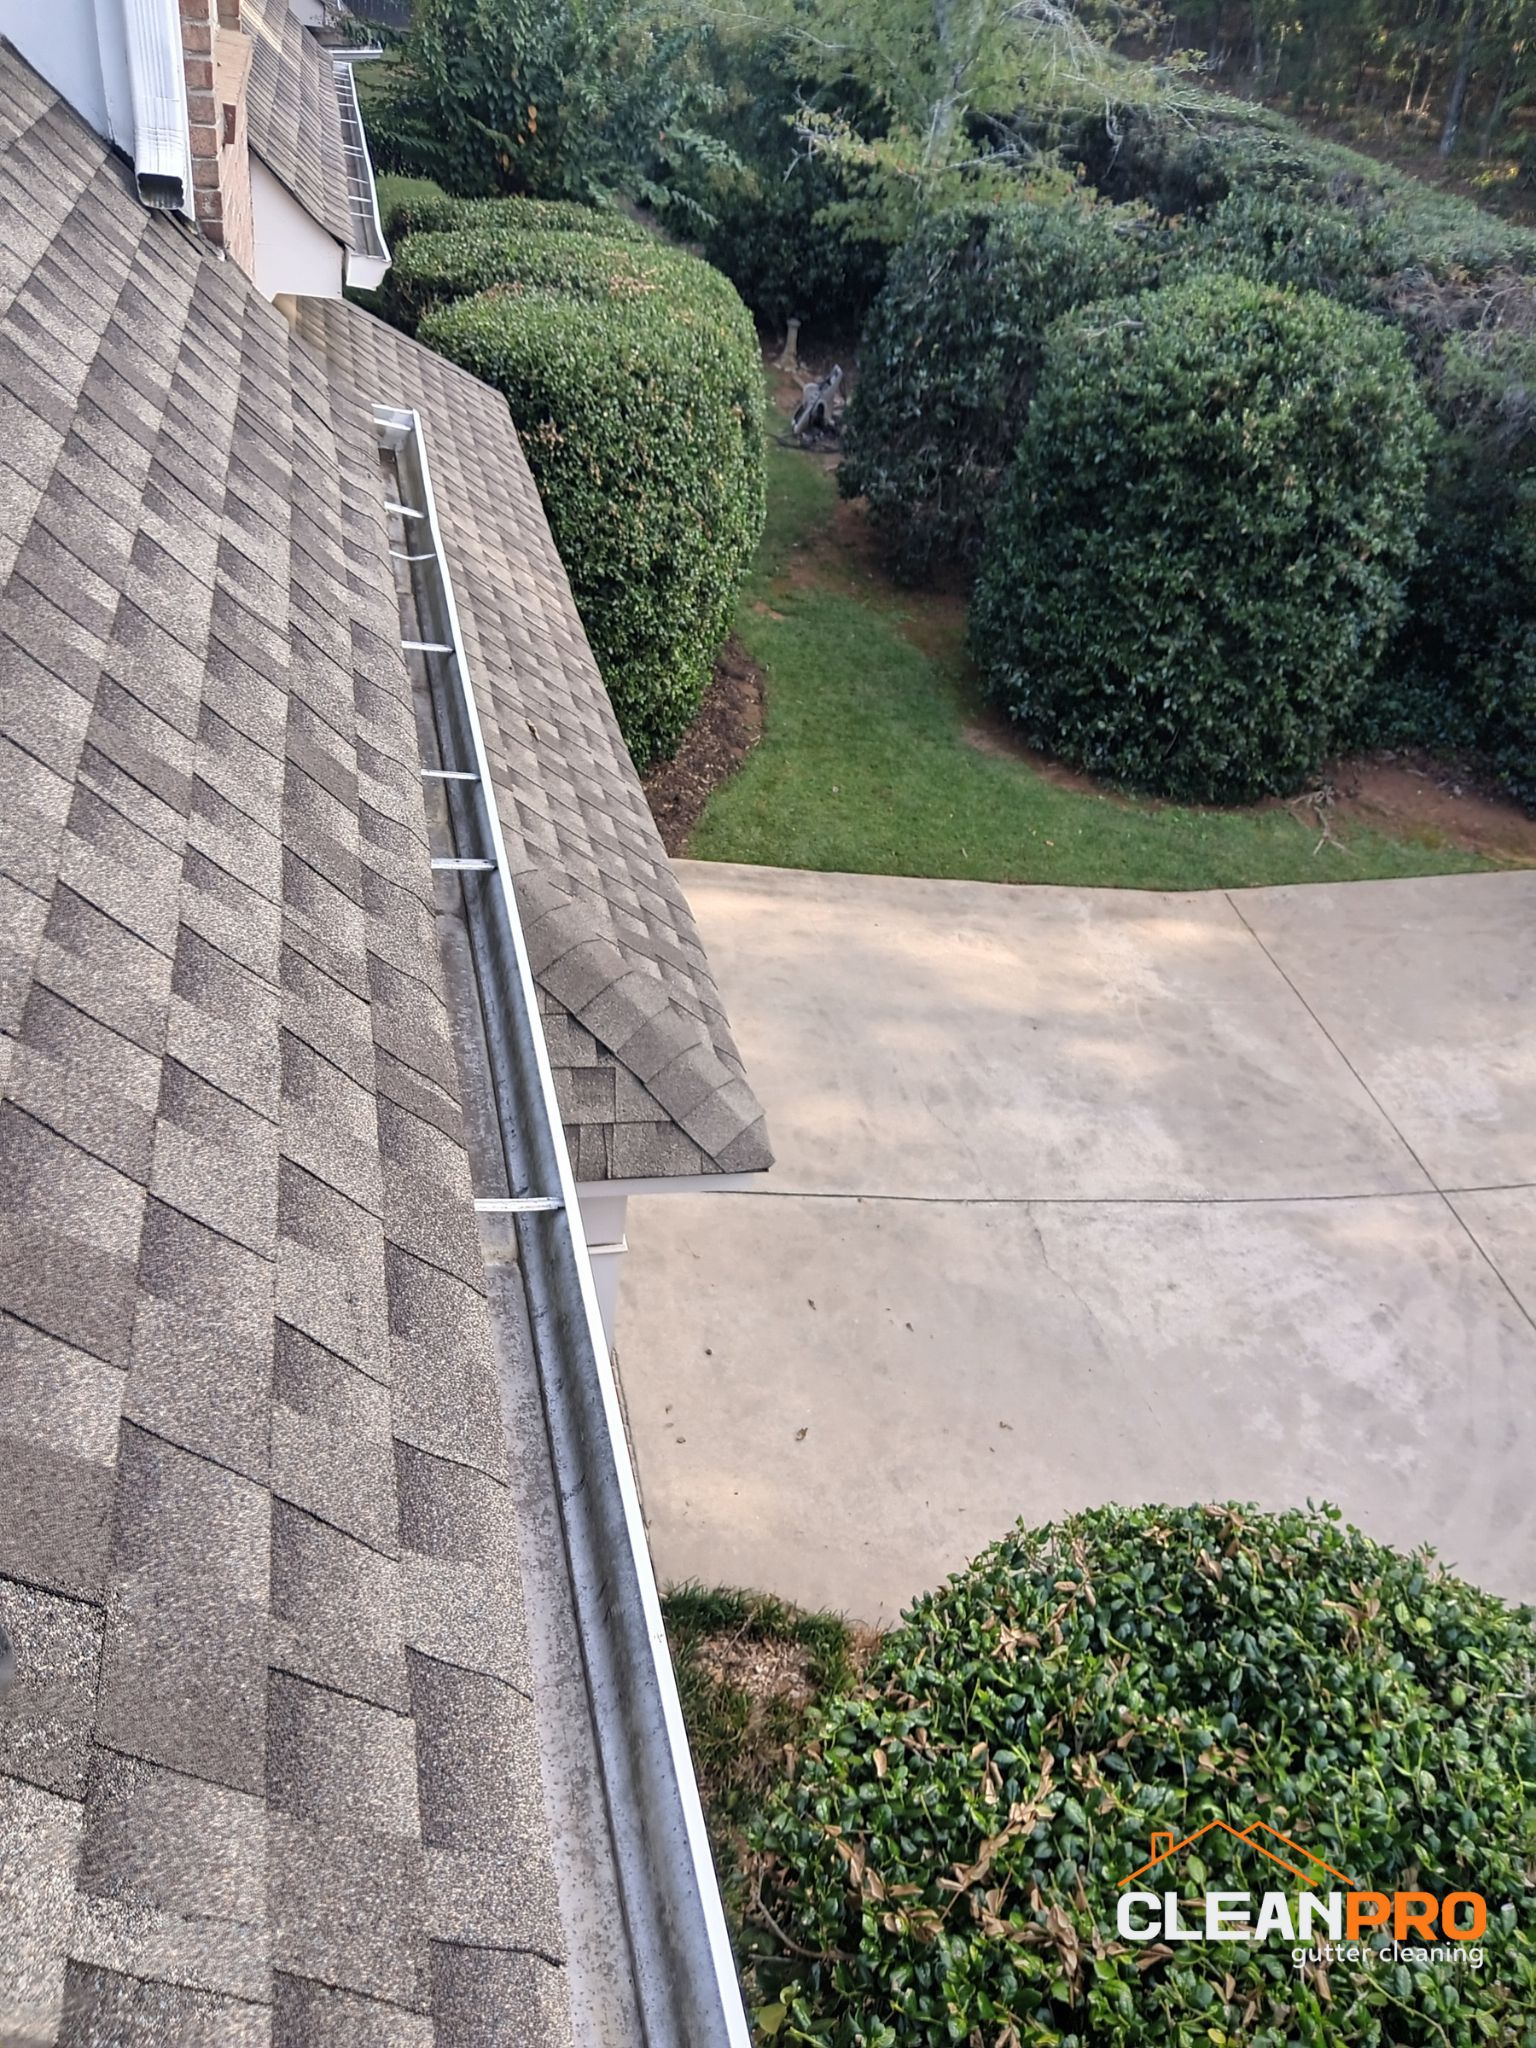 Quality Gutter Cleaning in Jacksonville FL